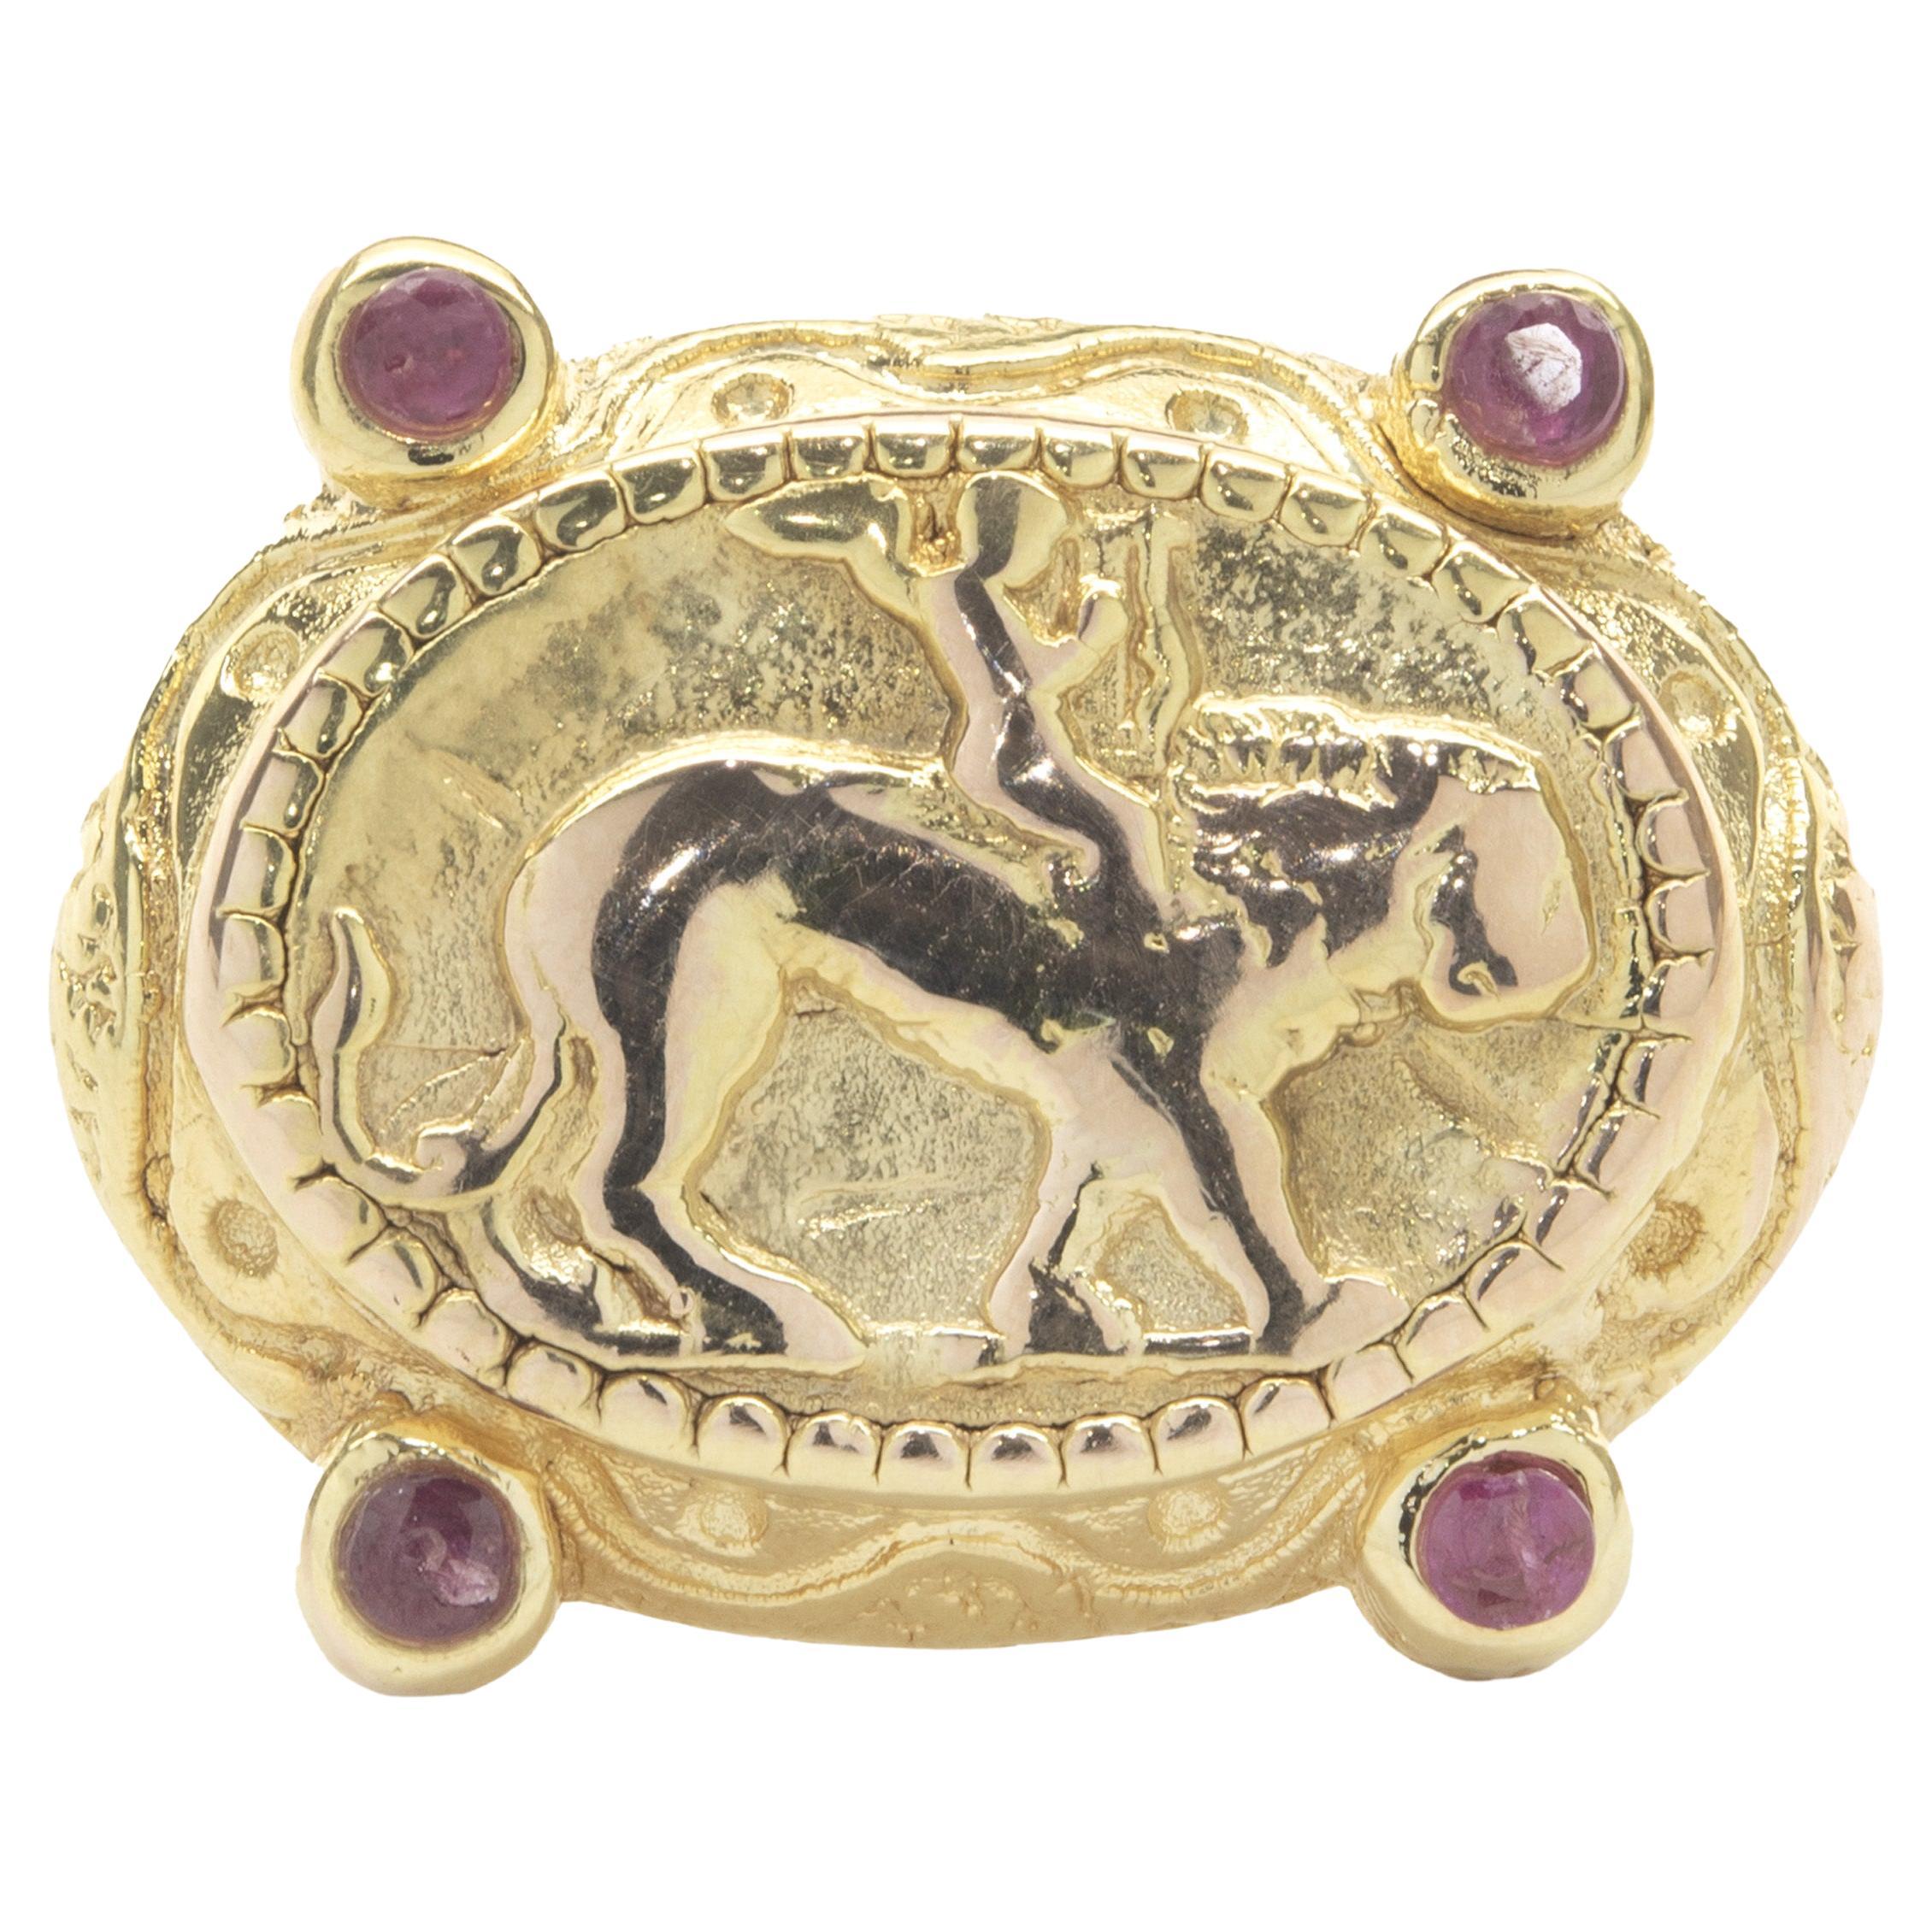 14 Karat Yellow Gold Vintage Ancient Roman Art Style Ring with Cabachon Rubies